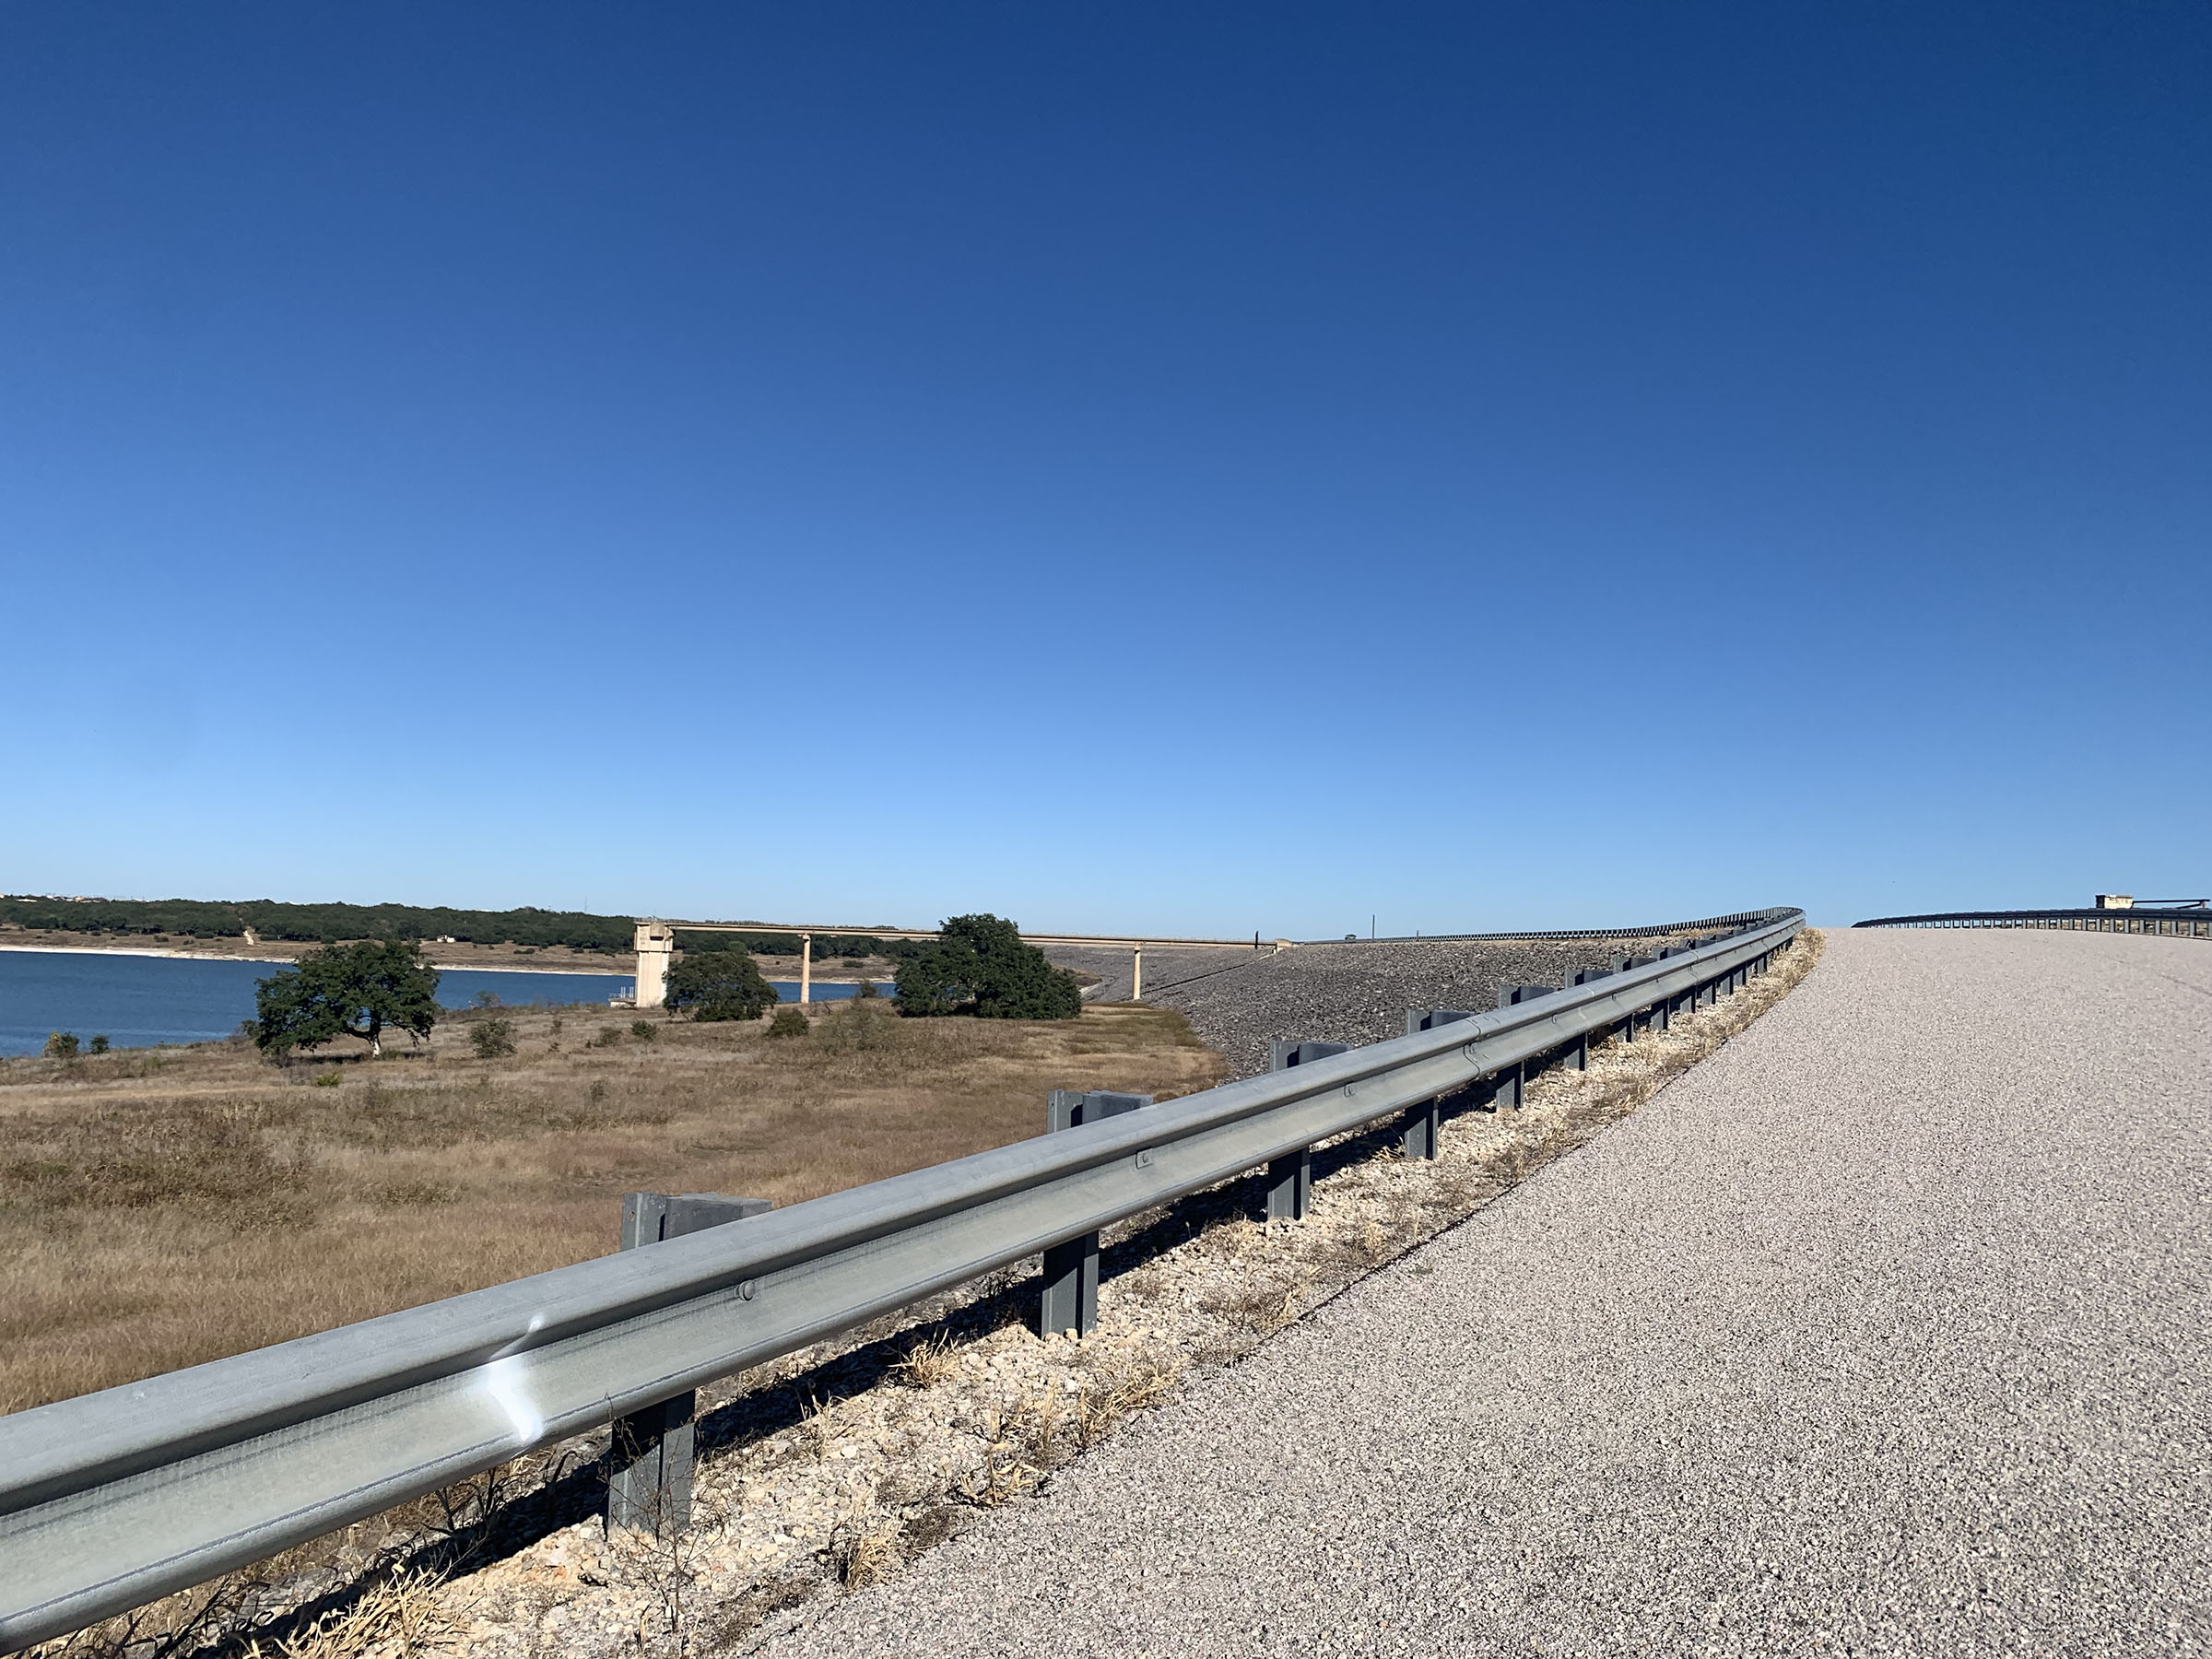 A steel guardrail next to a wide gray road under blue sky